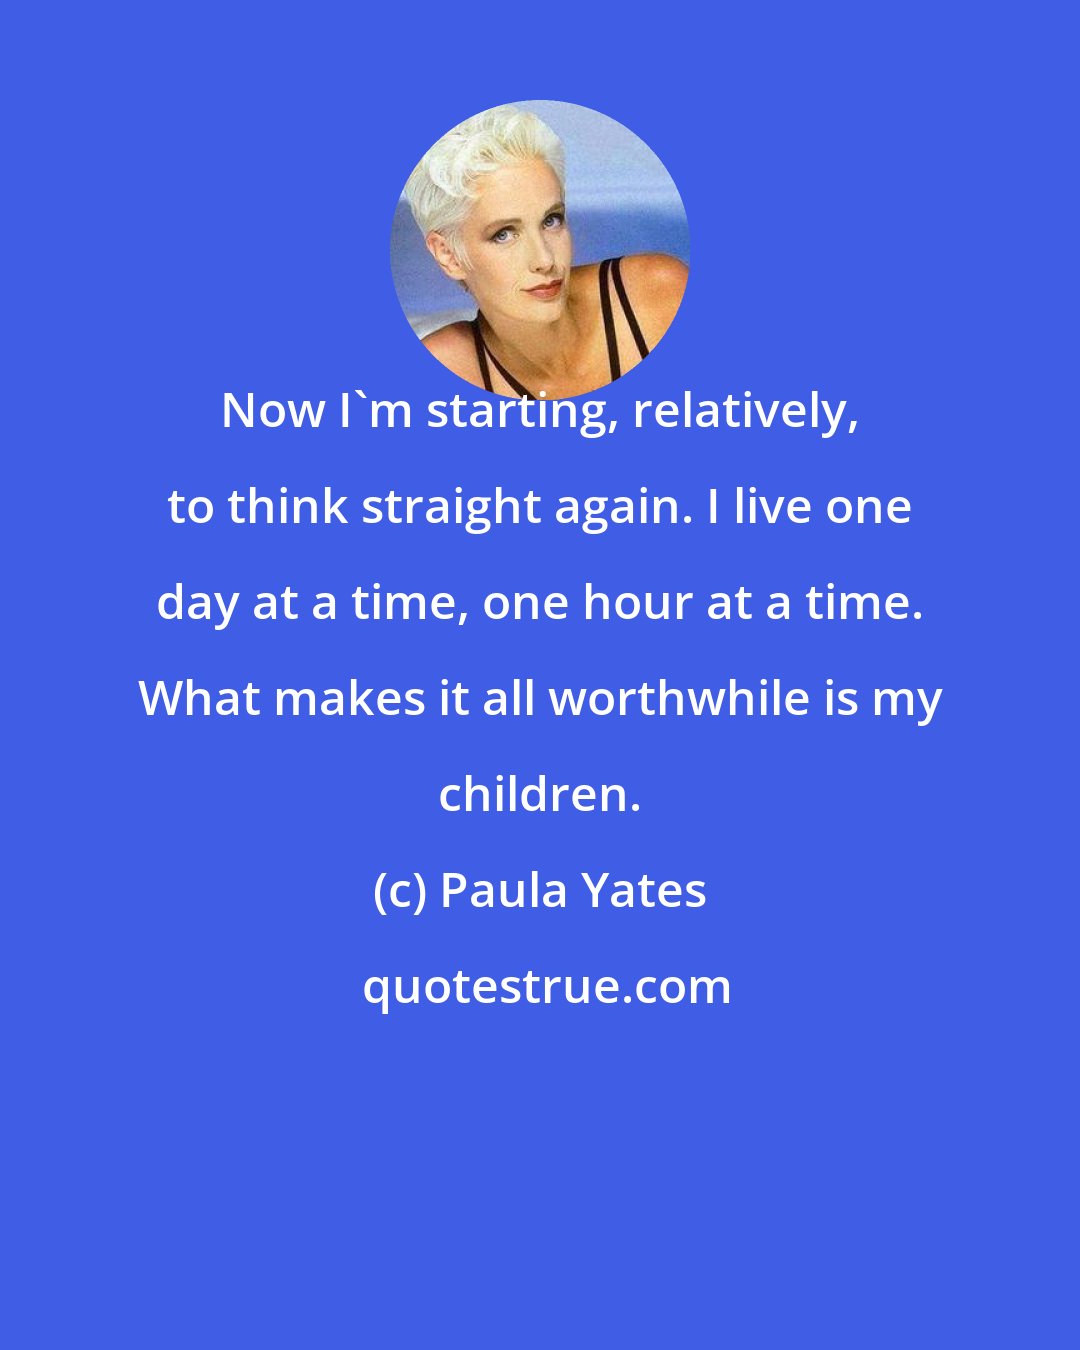 Paula Yates: Now I'm starting, relatively, to think straight again. I live one day at a time, one hour at a time. What makes it all worthwhile is my children.